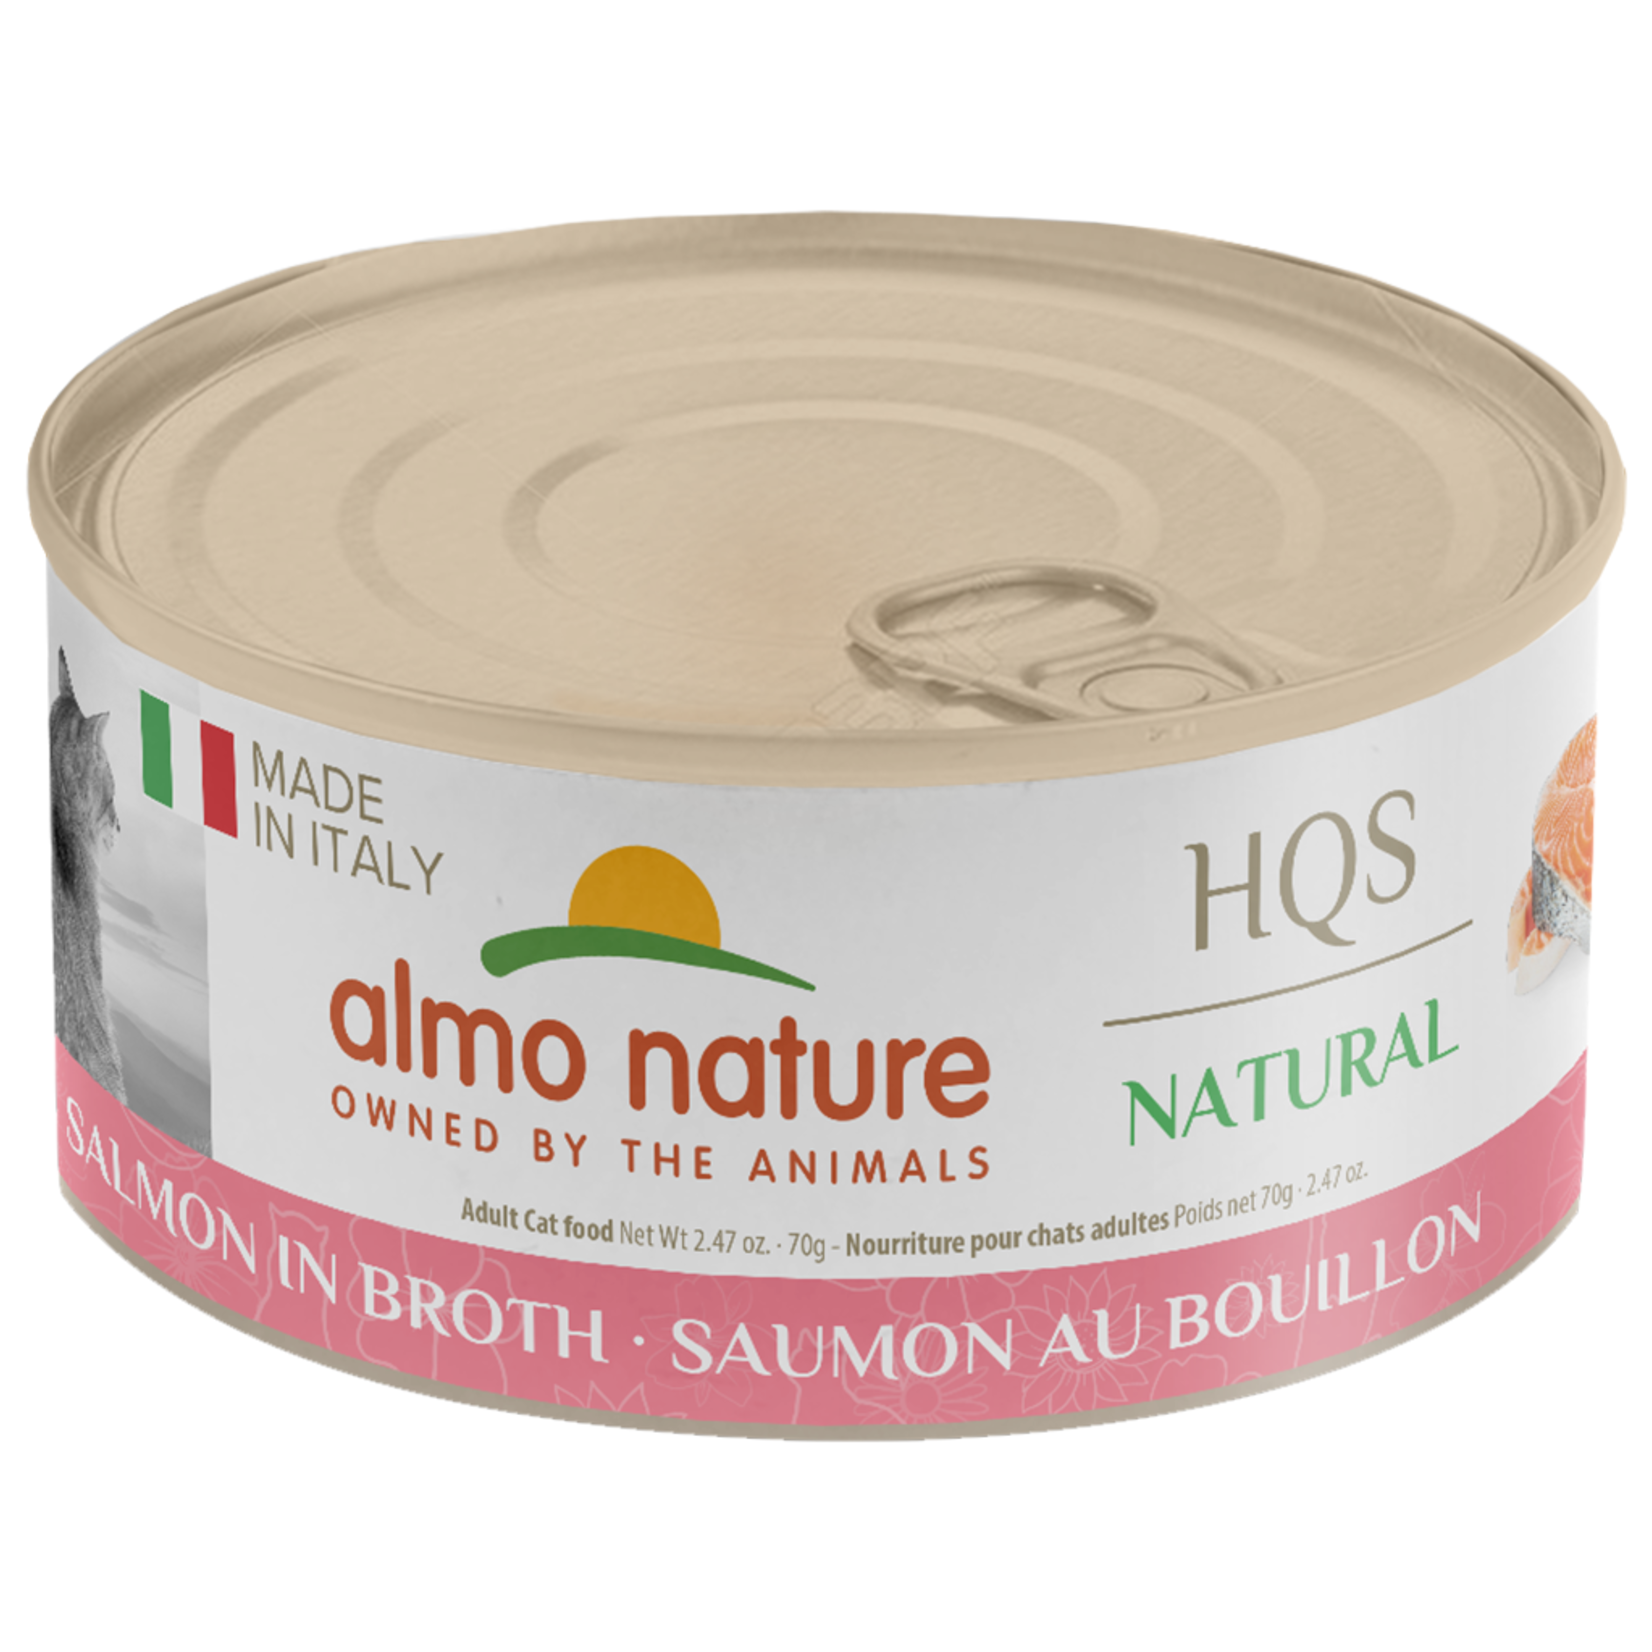 Almo Nature Made in Italy Salmon in Broth 70gm